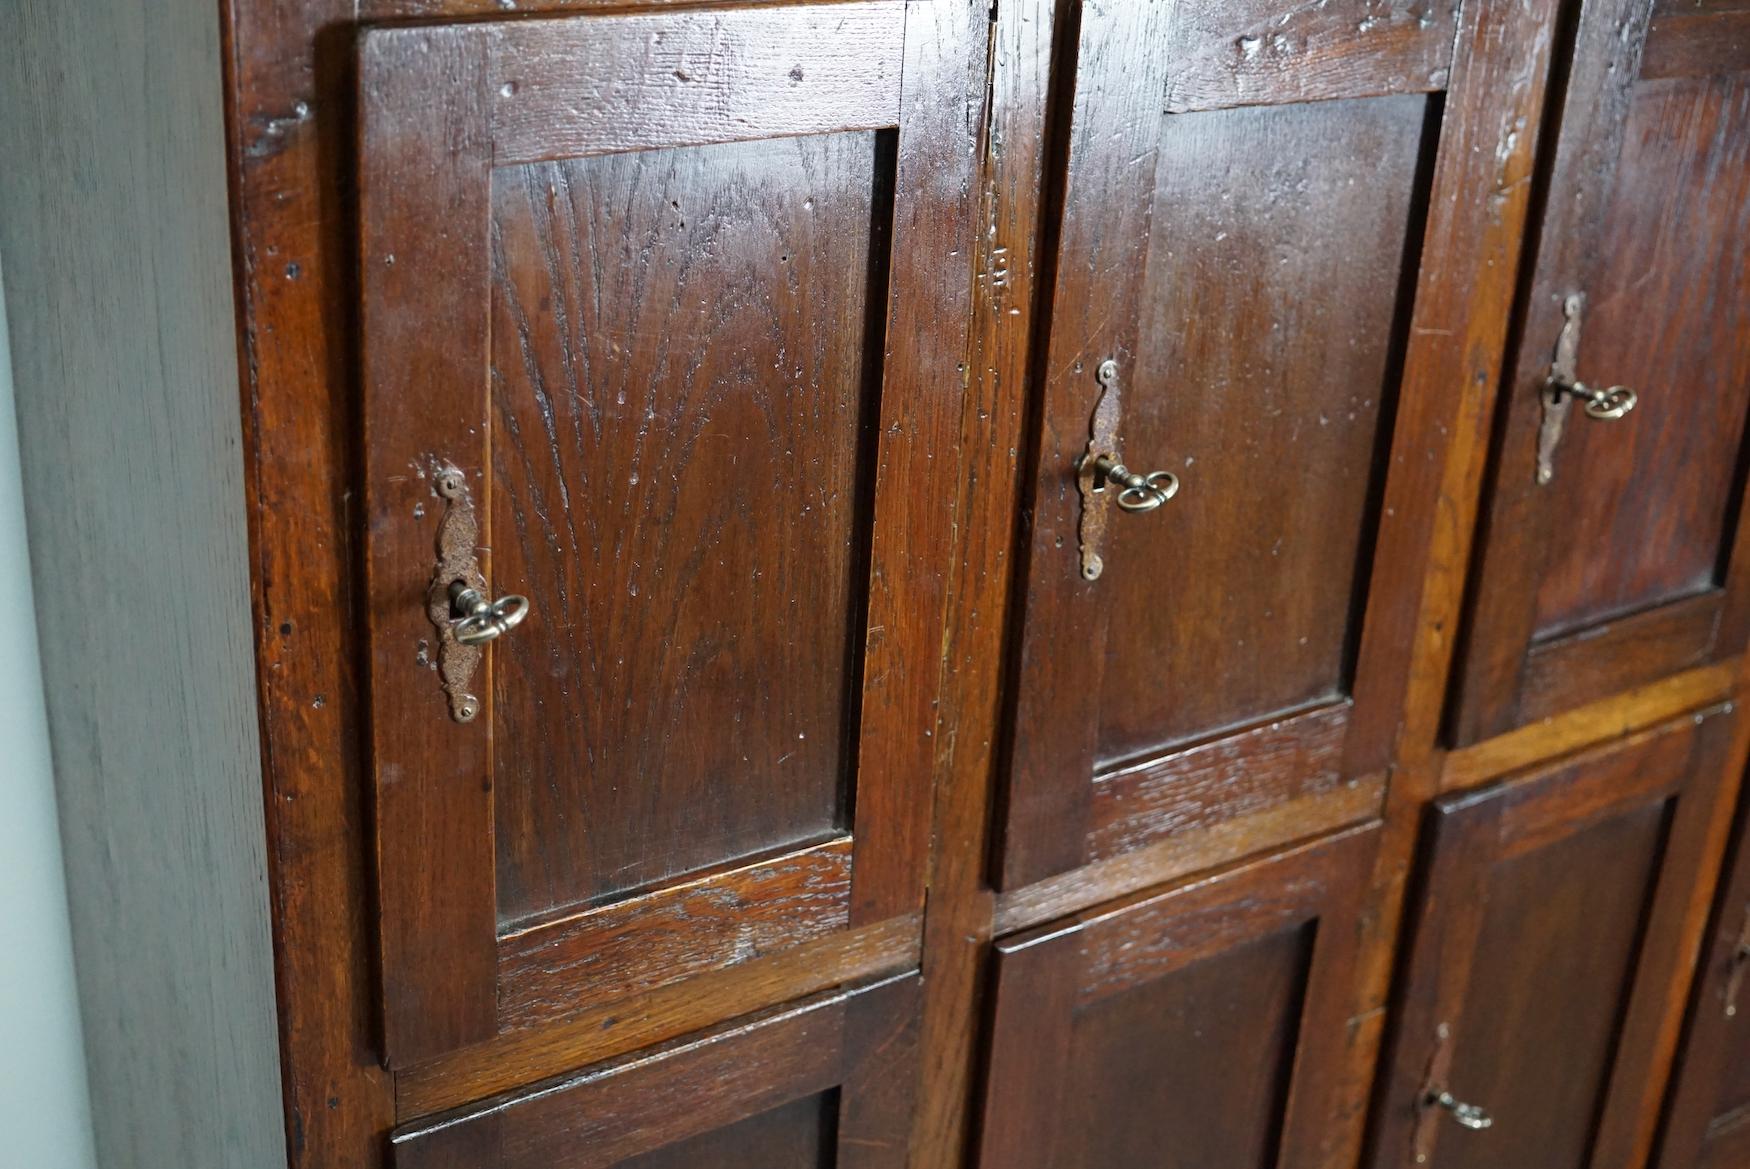 This Dutch oak locker with 16 doors was made around the 1920s in the Netherlands. It was used in a post office in the city of Nuenen. The interior dimensions of the compartments are: D W H 30 x 25 x 38 cm.